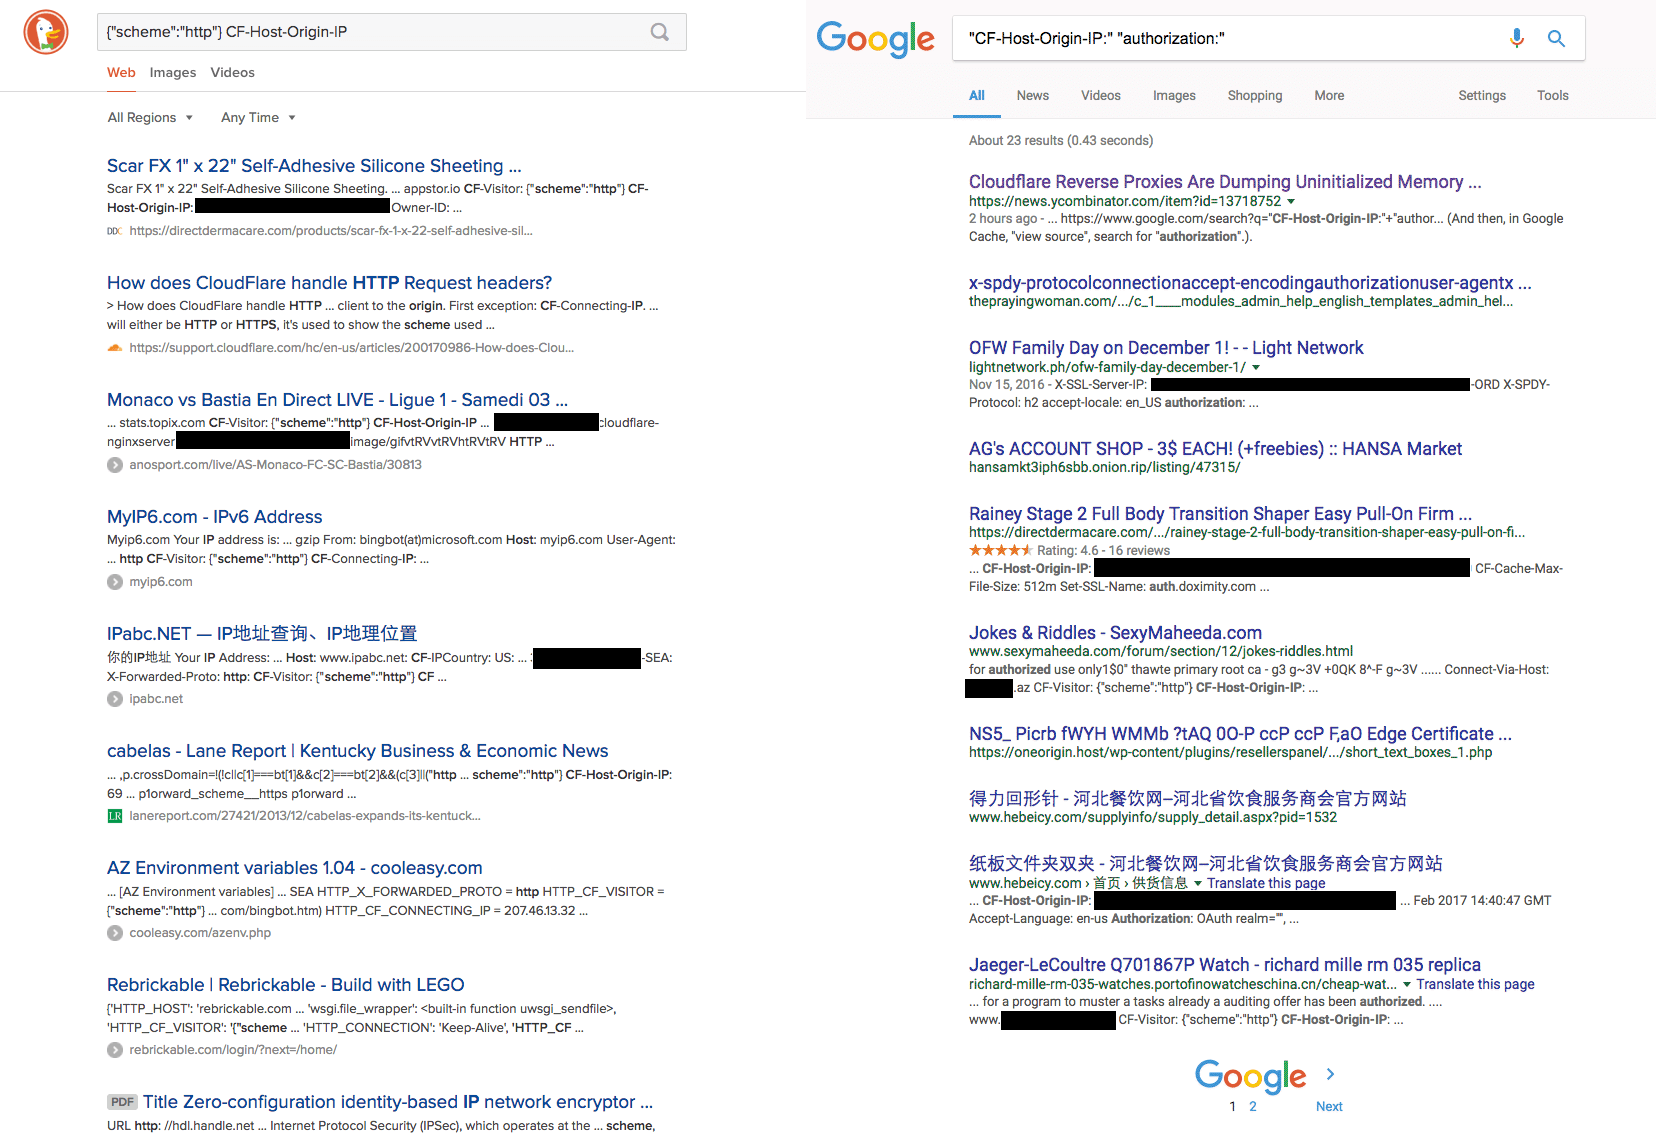 Search Results